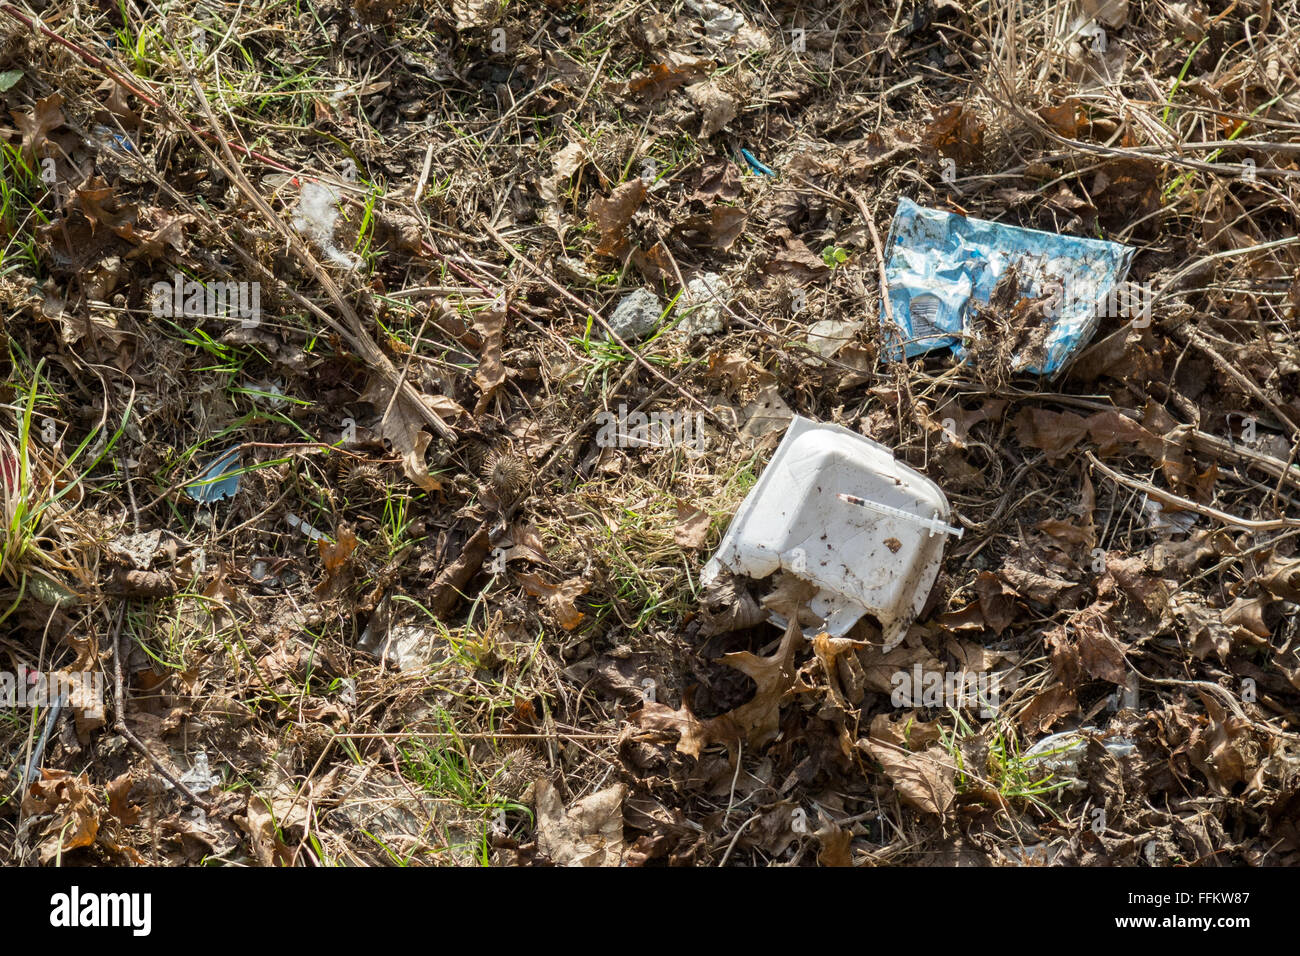 Used needle stuck in empty fast food packaging discarded by River Clyde, Glasgow, Scotland, UK Stock Photo